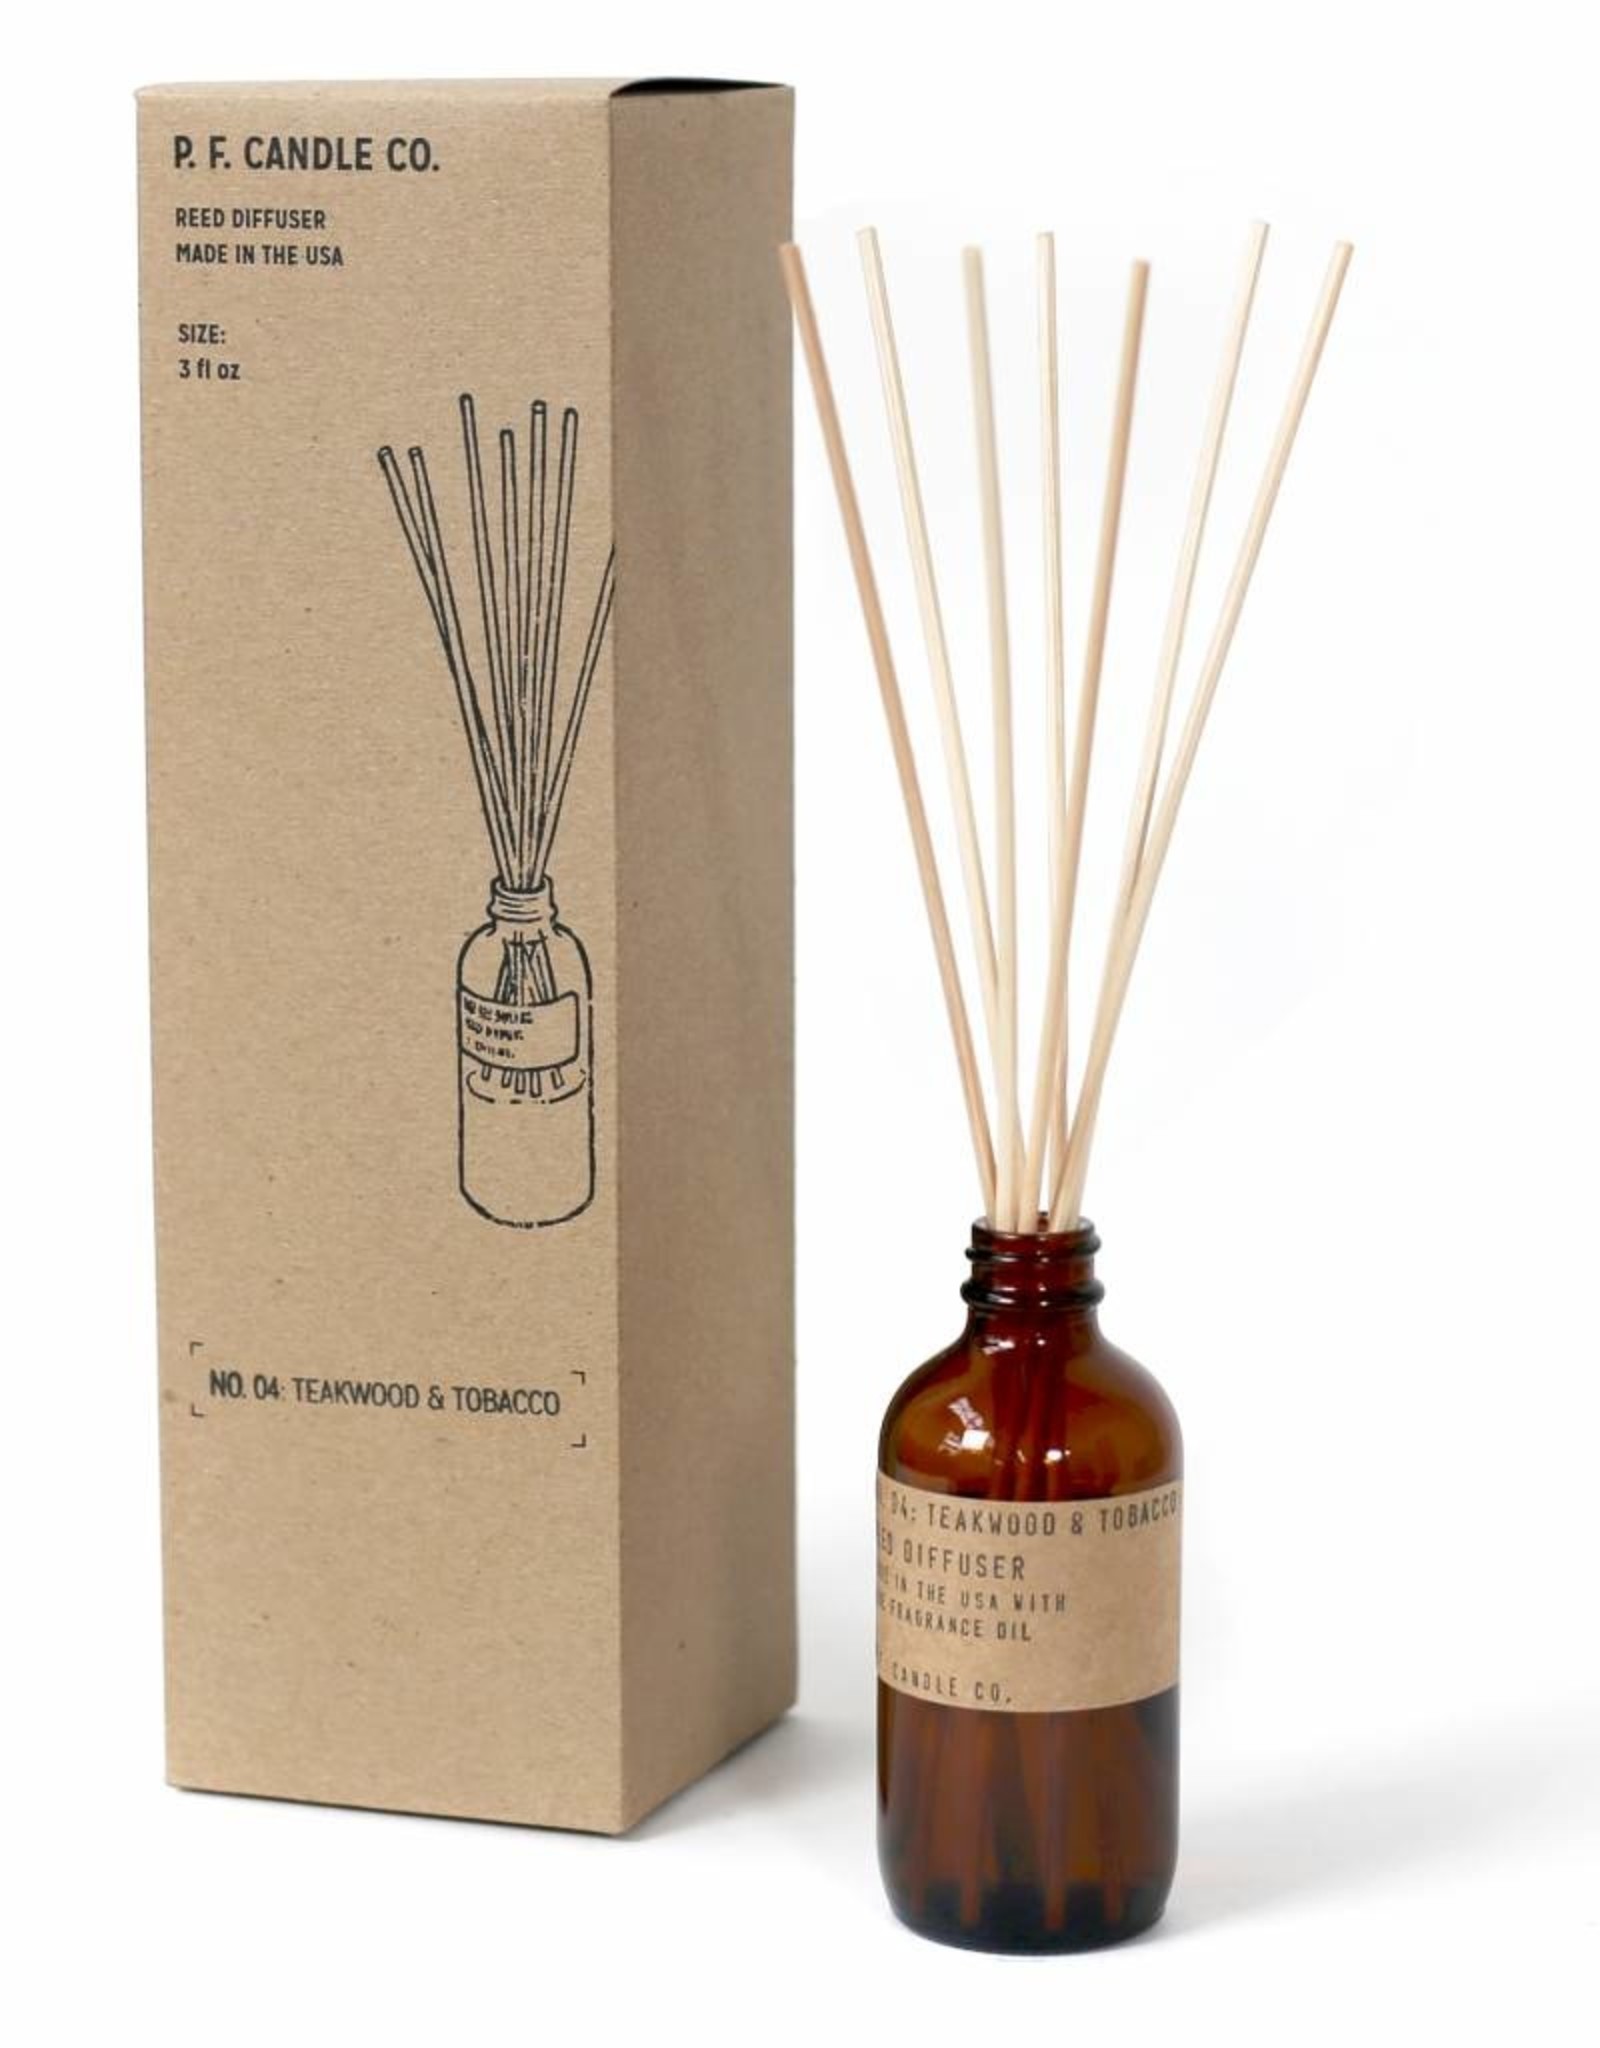 P.F.Candle & Co Teakwood and Tobacco No 4 Reed Diffuser